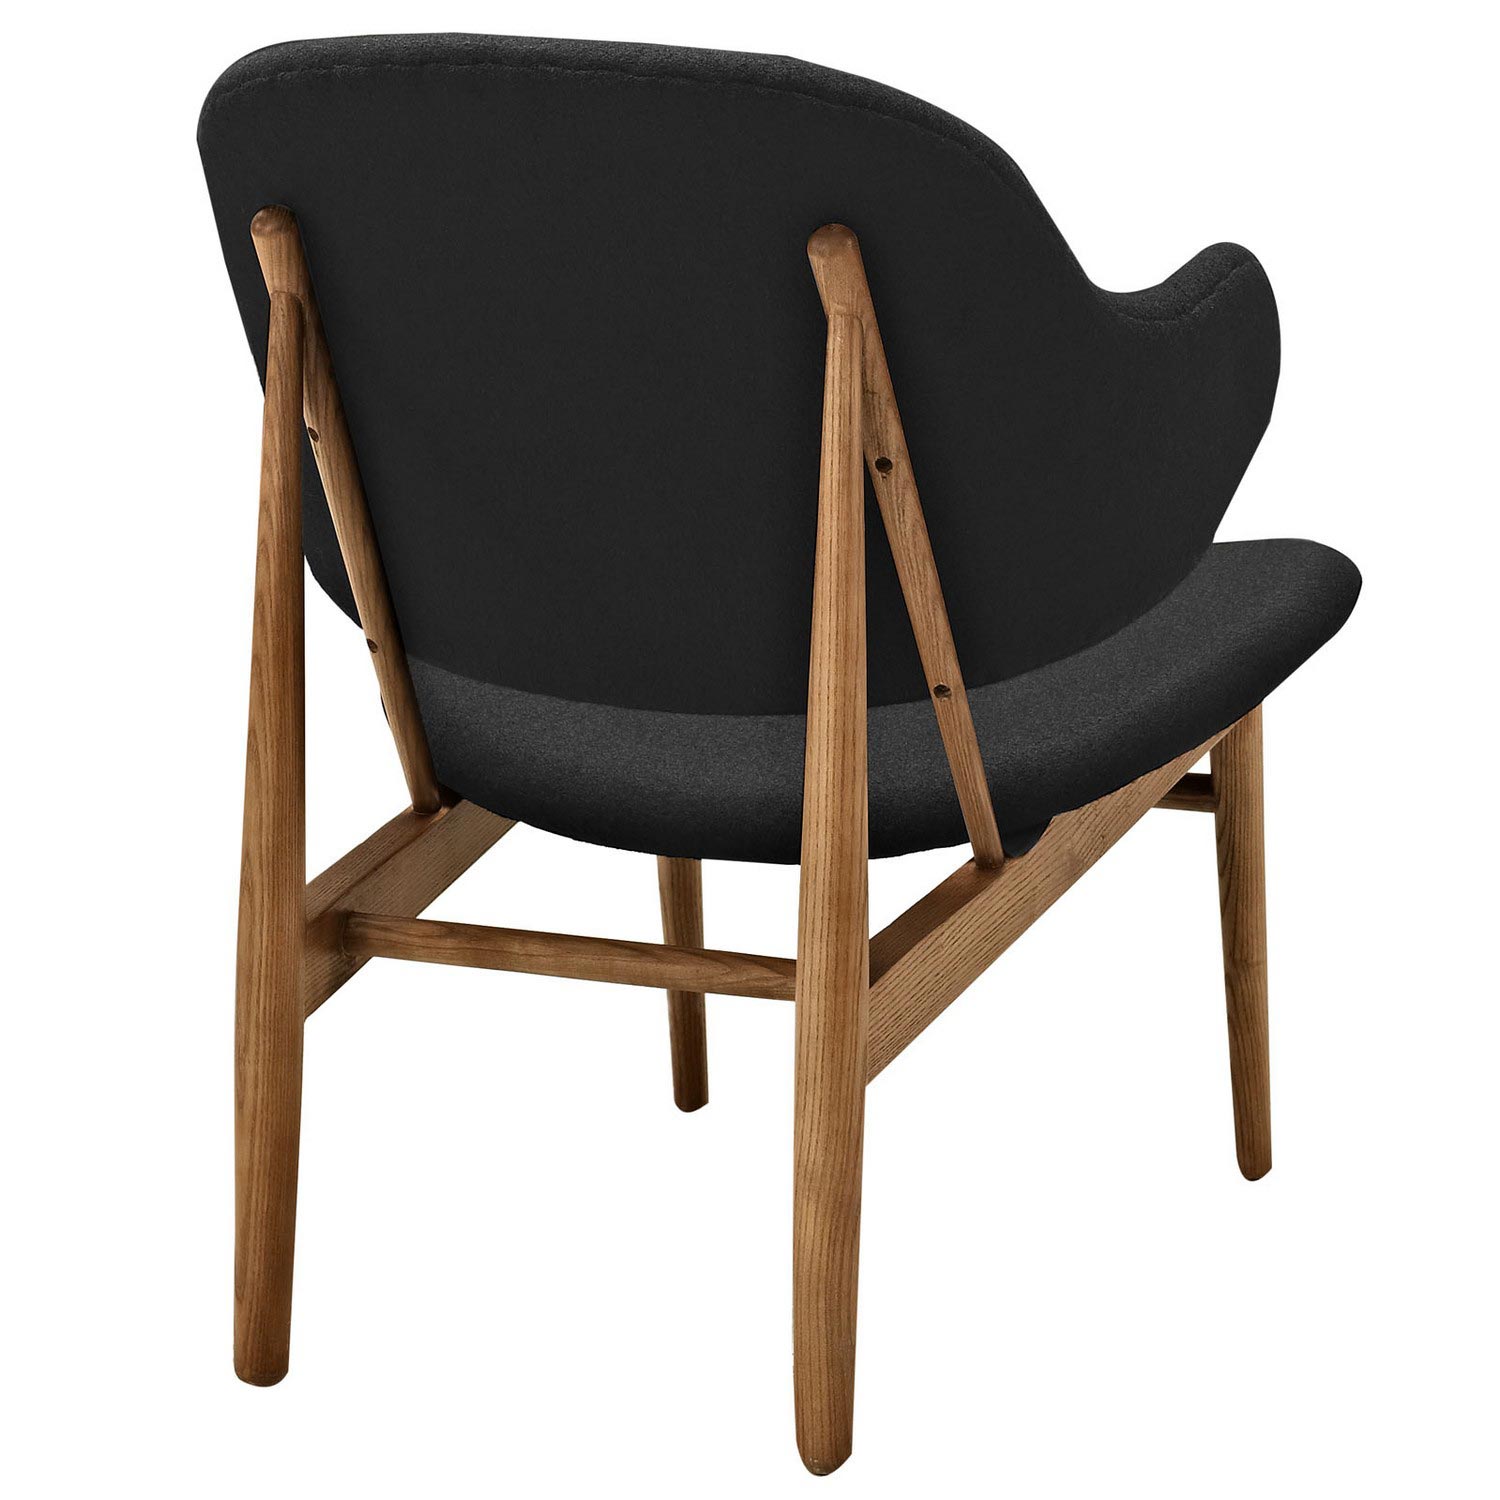 Modway Suffuse Lounge Chair - Maple Black